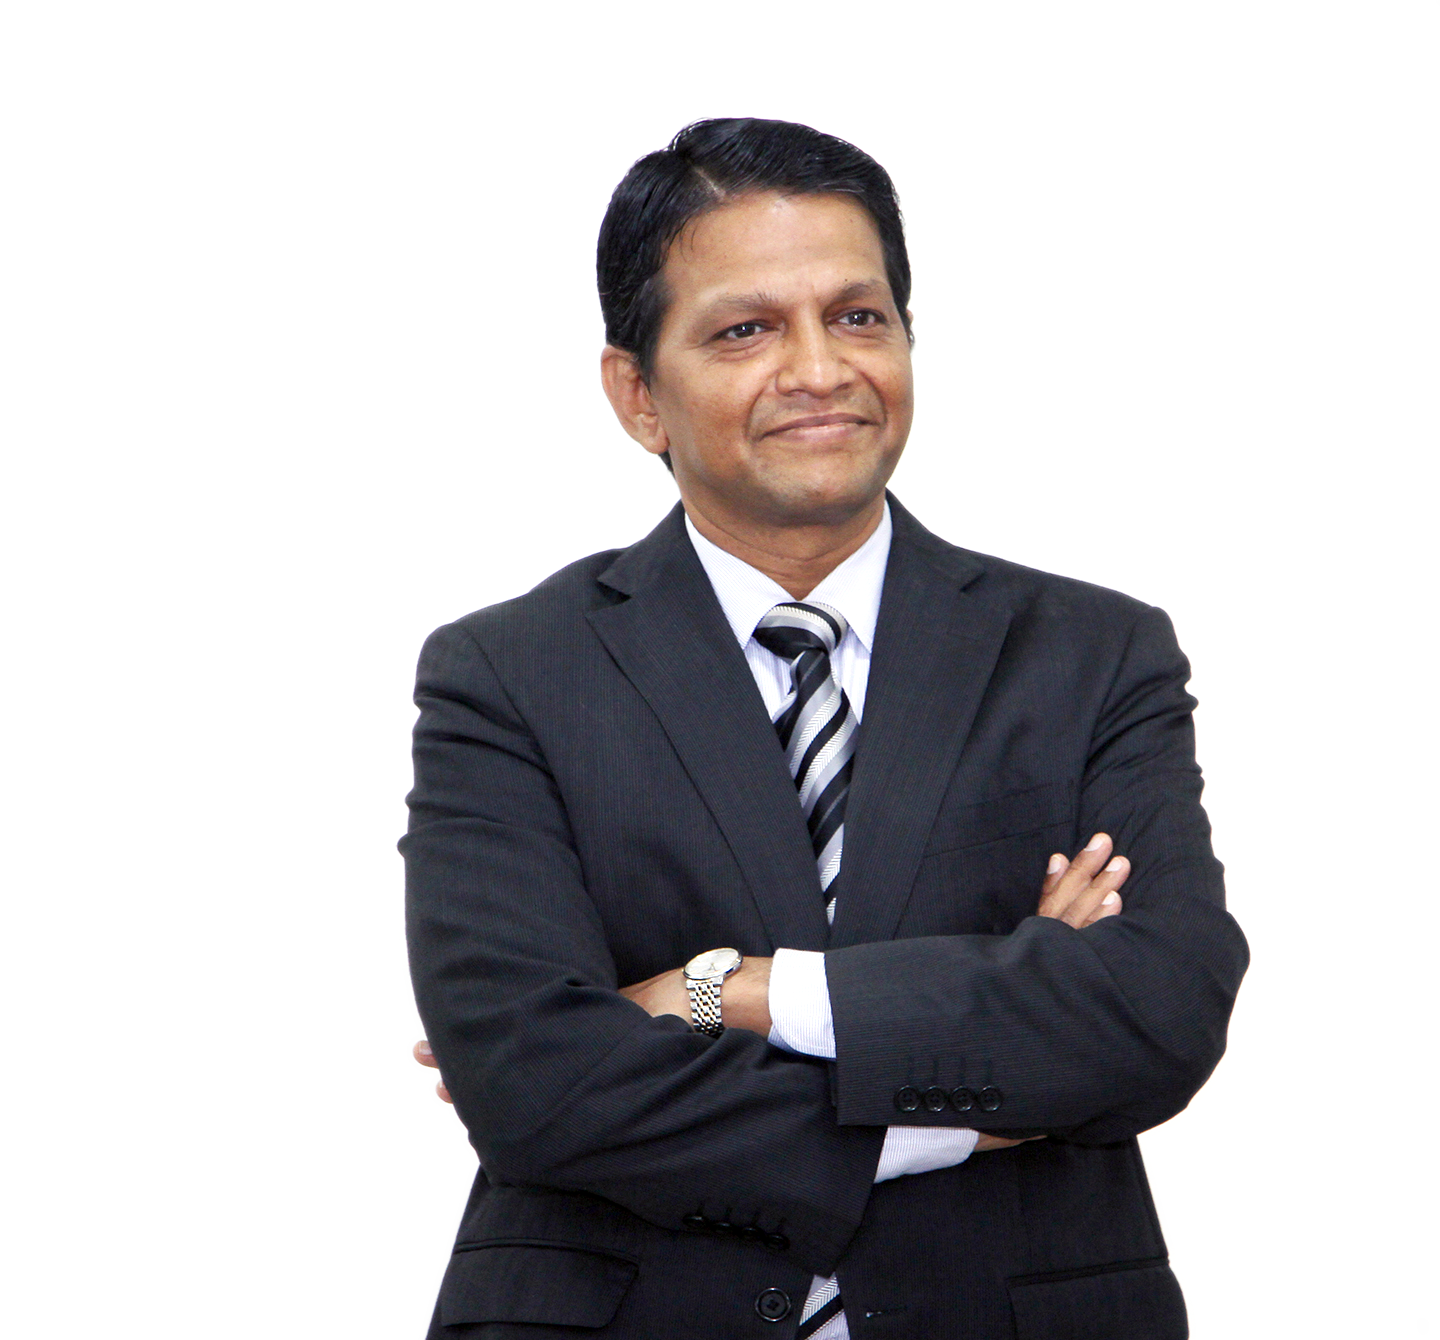 Venguswamy Ramaswamy, <span>Senior Vice President and Global Head – TCS iON, Tata Consultancy Services</span>